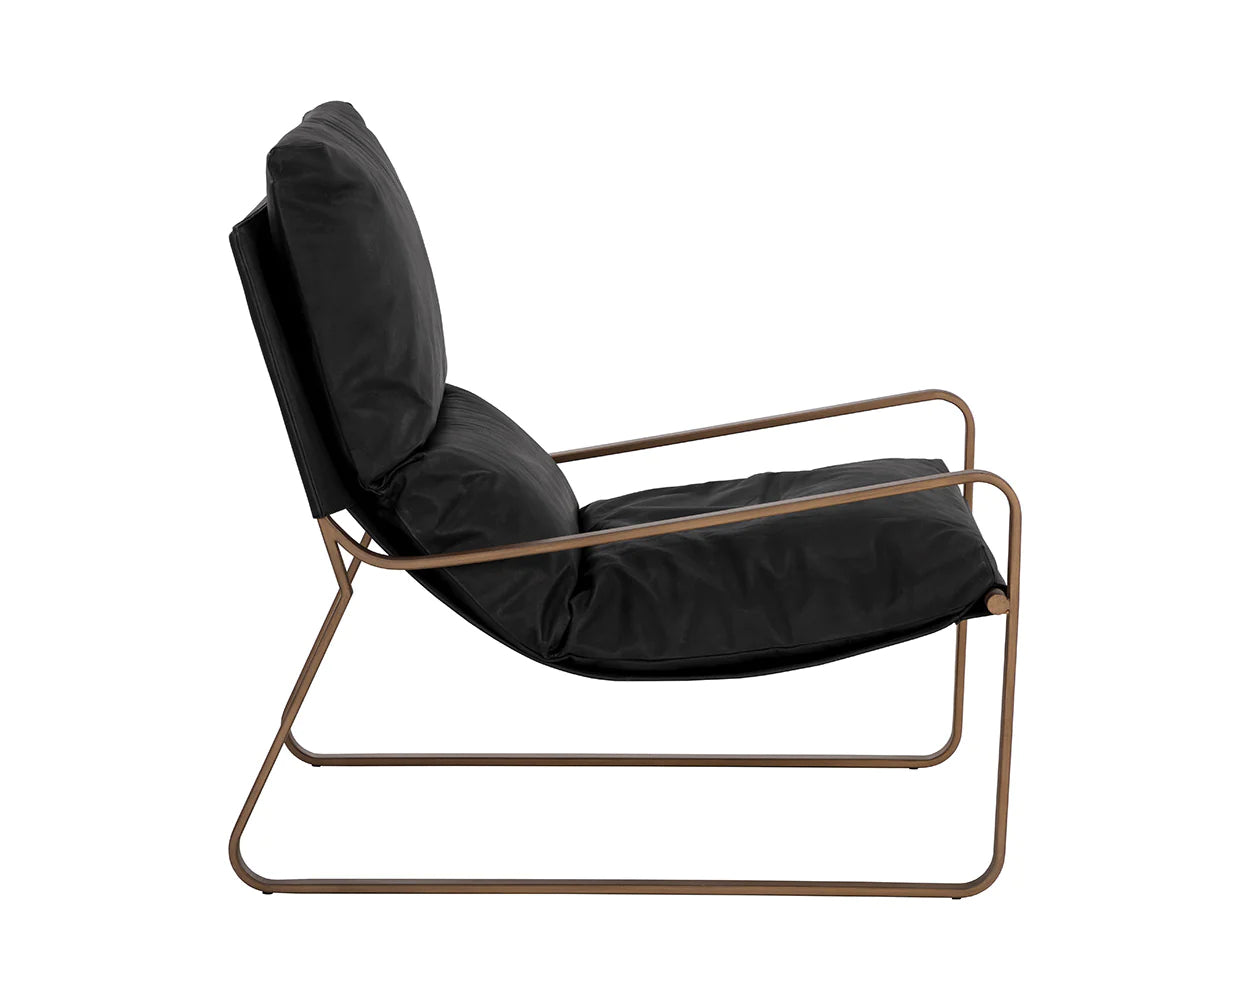 ZANCOR LOUNGE CHAIR - ANTIQUE BRASS - CHARCOAL BLACK LEATHER